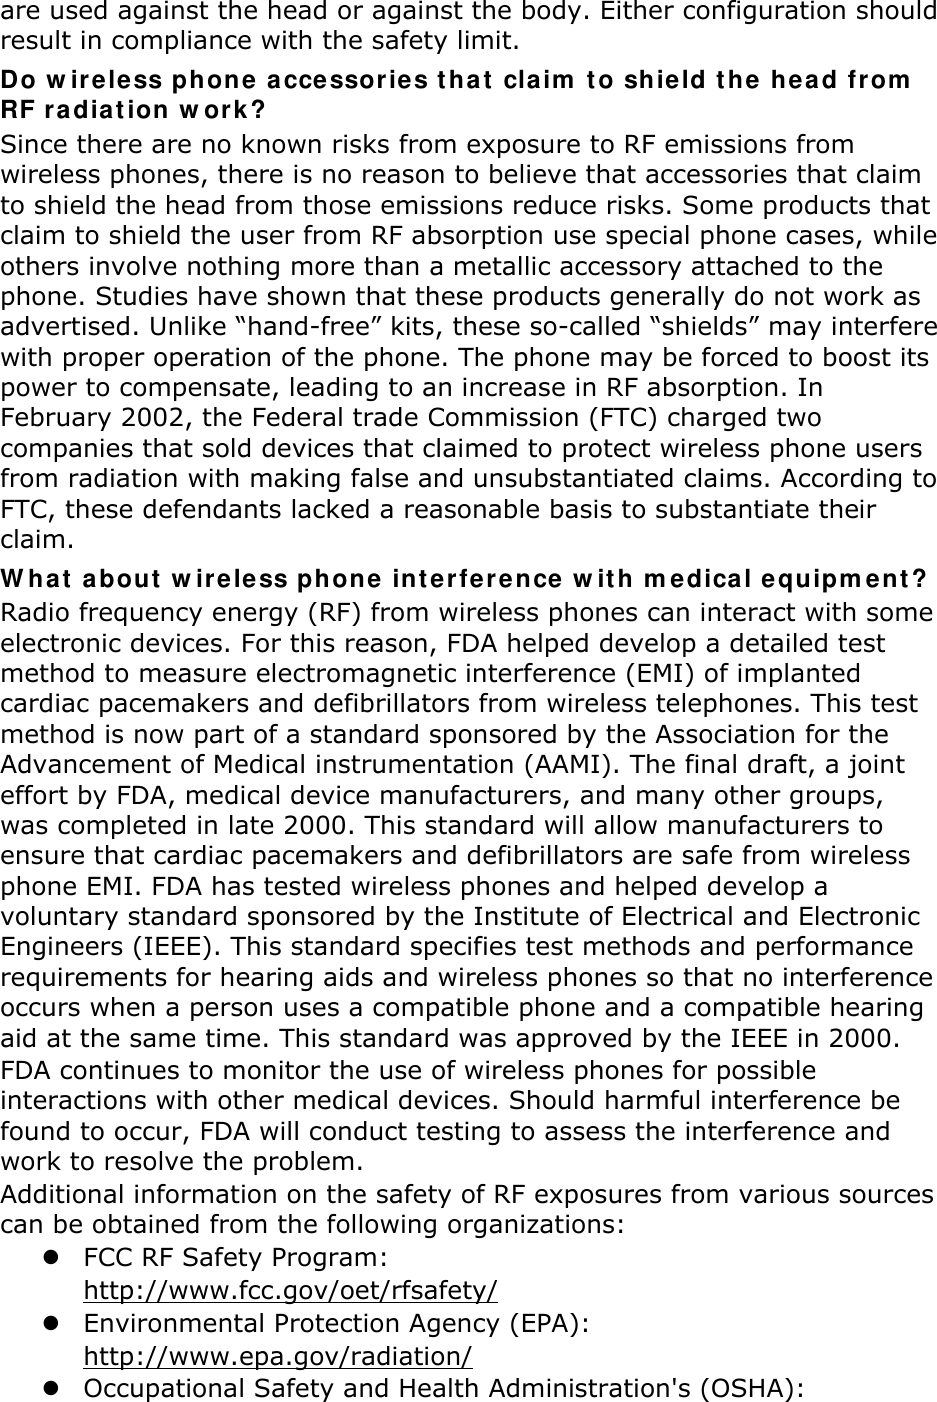 are used against the head or against the body. Either configuration should result in compliance with the safety limit. Do w ireless phone acce ssorie s t hat claim  to shield t he hea d fr om  RF radiat ion w ork? Since there are no known risks from exposure to RF emissions from wireless phones, there is no reason to believe that accessories that claim to shield the head from those emissions reduce risks. Some products that claim to shield the user from RF absorption use special phone cases, while others involve nothing more than a metallic accessory attached to the phone. Studies have shown that these products generally do not work as advertised. Unlike “hand-free” kits, these so-called “shields” may interfere with proper operation of the phone. The phone may be forced to boost its power to compensate, leading to an increase in RF absorption. In February 2002, the Federal trade Commission (FTC) charged two companies that sold devices that claimed to protect wireless phone users from radiation with making false and unsubstantiated claims. According to FTC, these defendants lacked a reasonable basis to substantiate their claim. W hat a bout  w ir ele ss phone interfe rence w it h m edical equipm e nt? Radio frequency energy (RF) from wireless phones can interact with some electronic devices. For this reason, FDA helped develop a detailed test method to measure electromagnetic interference (EMI) of implanted cardiac pacemakers and defibrillators from wireless telephones. This test method is now part of a standard sponsored by the Association for the Advancement of Medical instrumentation (AAMI). The final draft, a joint effort by FDA, medical device manufacturers, and many other groups, was completed in late 2000. This standard will allow manufacturers to ensure that cardiac pacemakers and defibrillators are safe from wireless phone EMI. FDA has tested wireless phones and helped develop a voluntary standard sponsored by the Institute of Electrical and Electronic Engineers (IEEE). This standard specifies test methods and performance requirements for hearing aids and wireless phones so that no interference occurs when a person uses a compatible phone and a compatible hearing aid at the same time. This standard was approved by the IEEE in 2000. FDA continues to monitor the use of wireless phones for possible interactions with other medical devices. Should harmful interference be found to occur, FDA will conduct testing to assess the interference and work to resolve the problem. Additional information on the safety of RF exposures from various sources can be obtained from the following organizations: z FCC RF Safety Program:  http://www.fcc.gov/oet/rfsafety/z Environmental Protection Agency (EPA):  http://www.epa.gov/radiation/z Occupational Safety and Health Administration&apos;s (OSHA):   